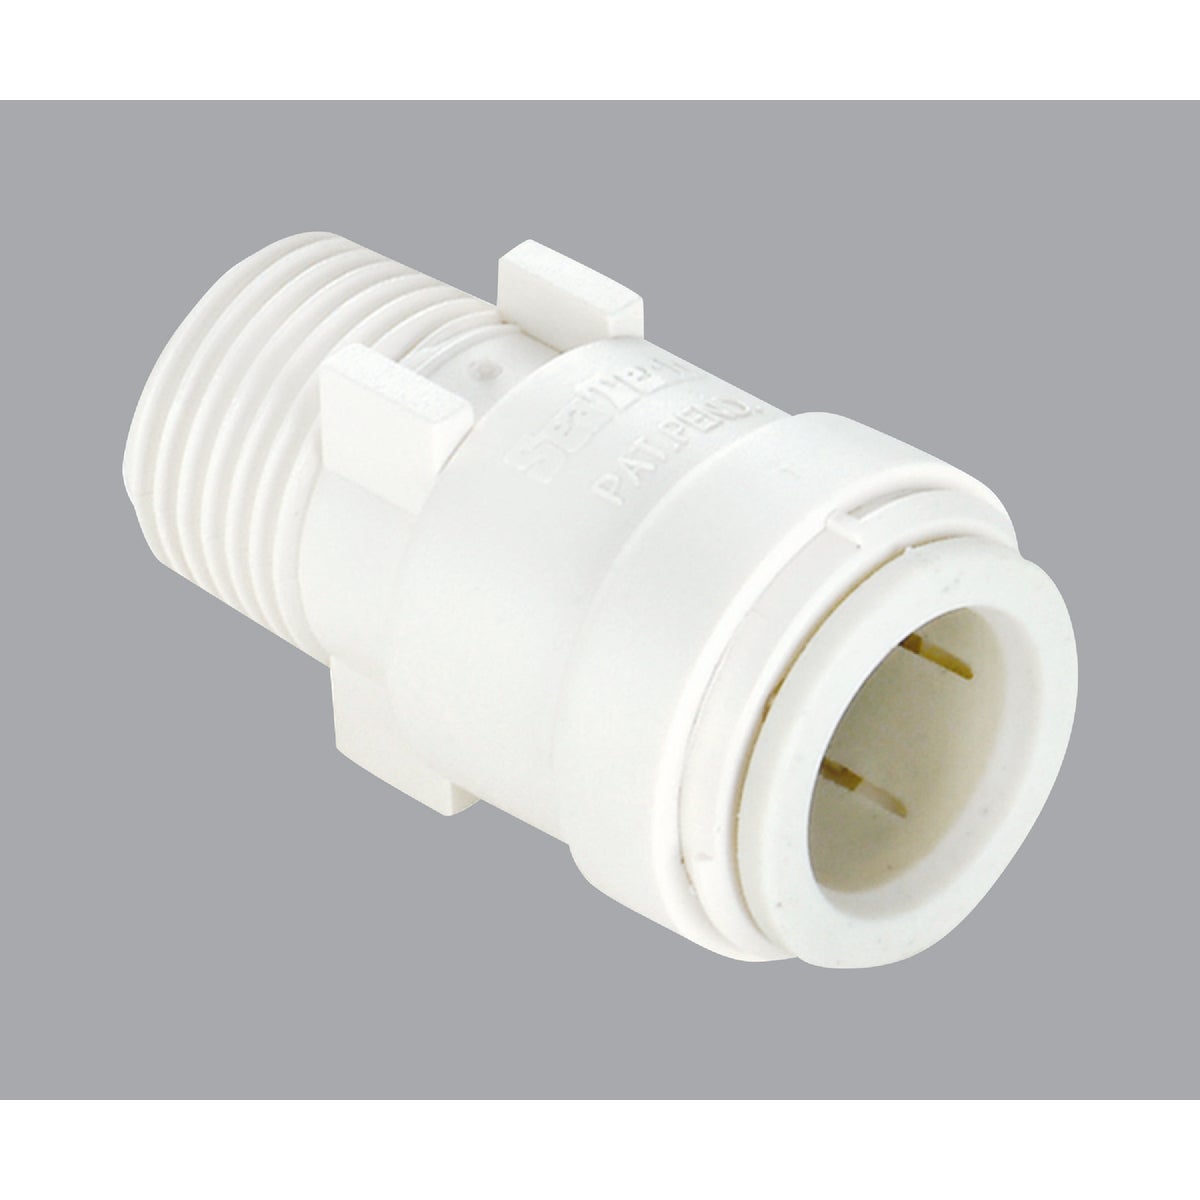 Watts Aqualock 1/2 In. CTS x 1/2 In. MPT Quick Connect Plastic Connector